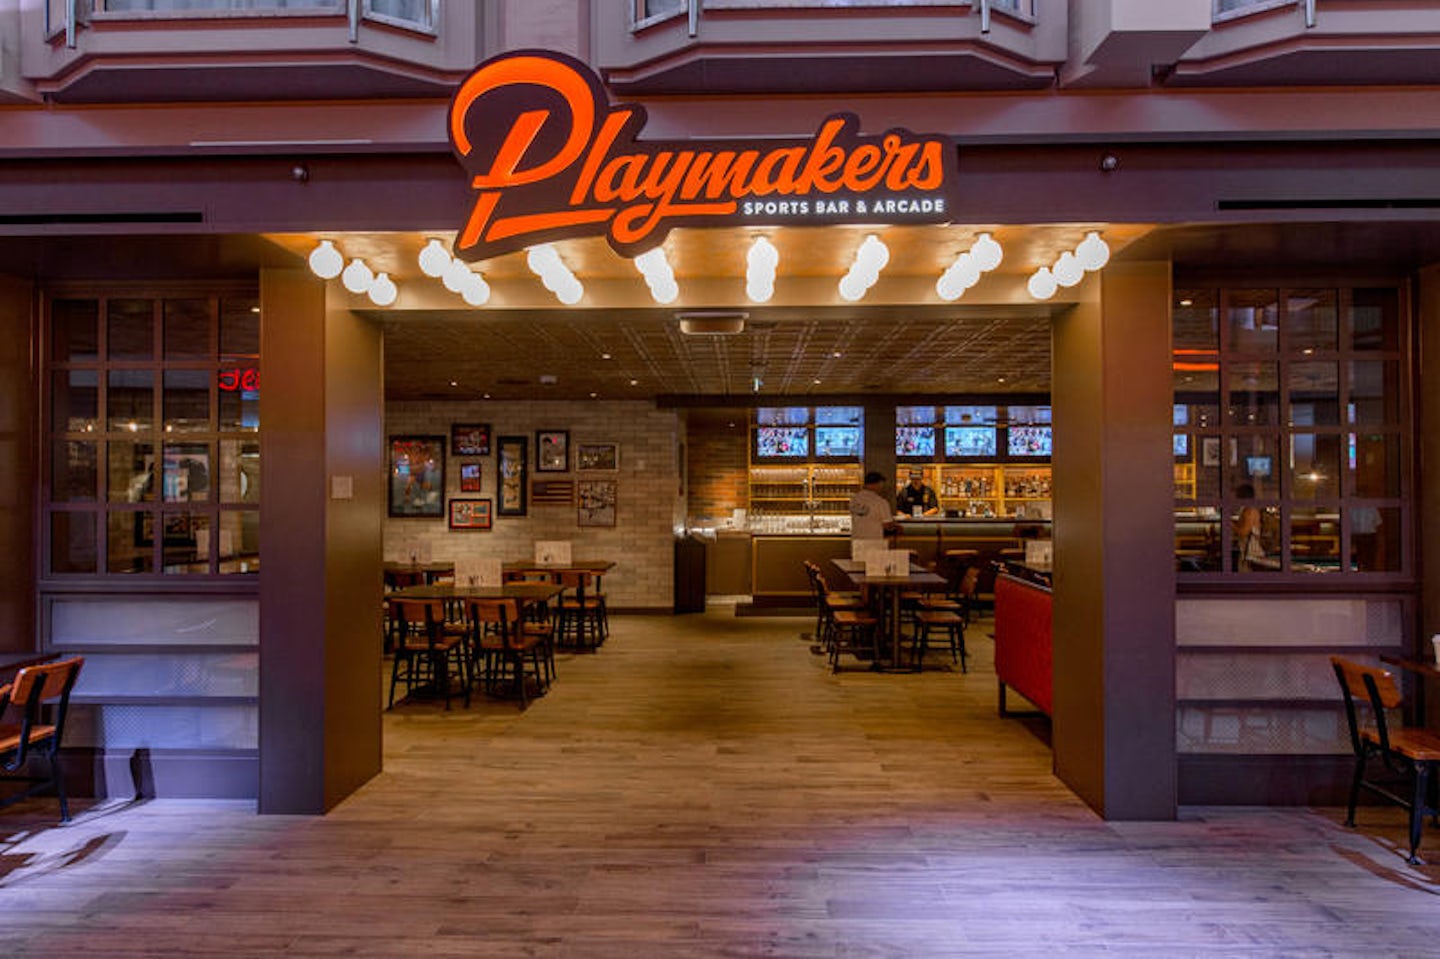 Playmakers Sports Bar & Arcade on Mariner of the Seas